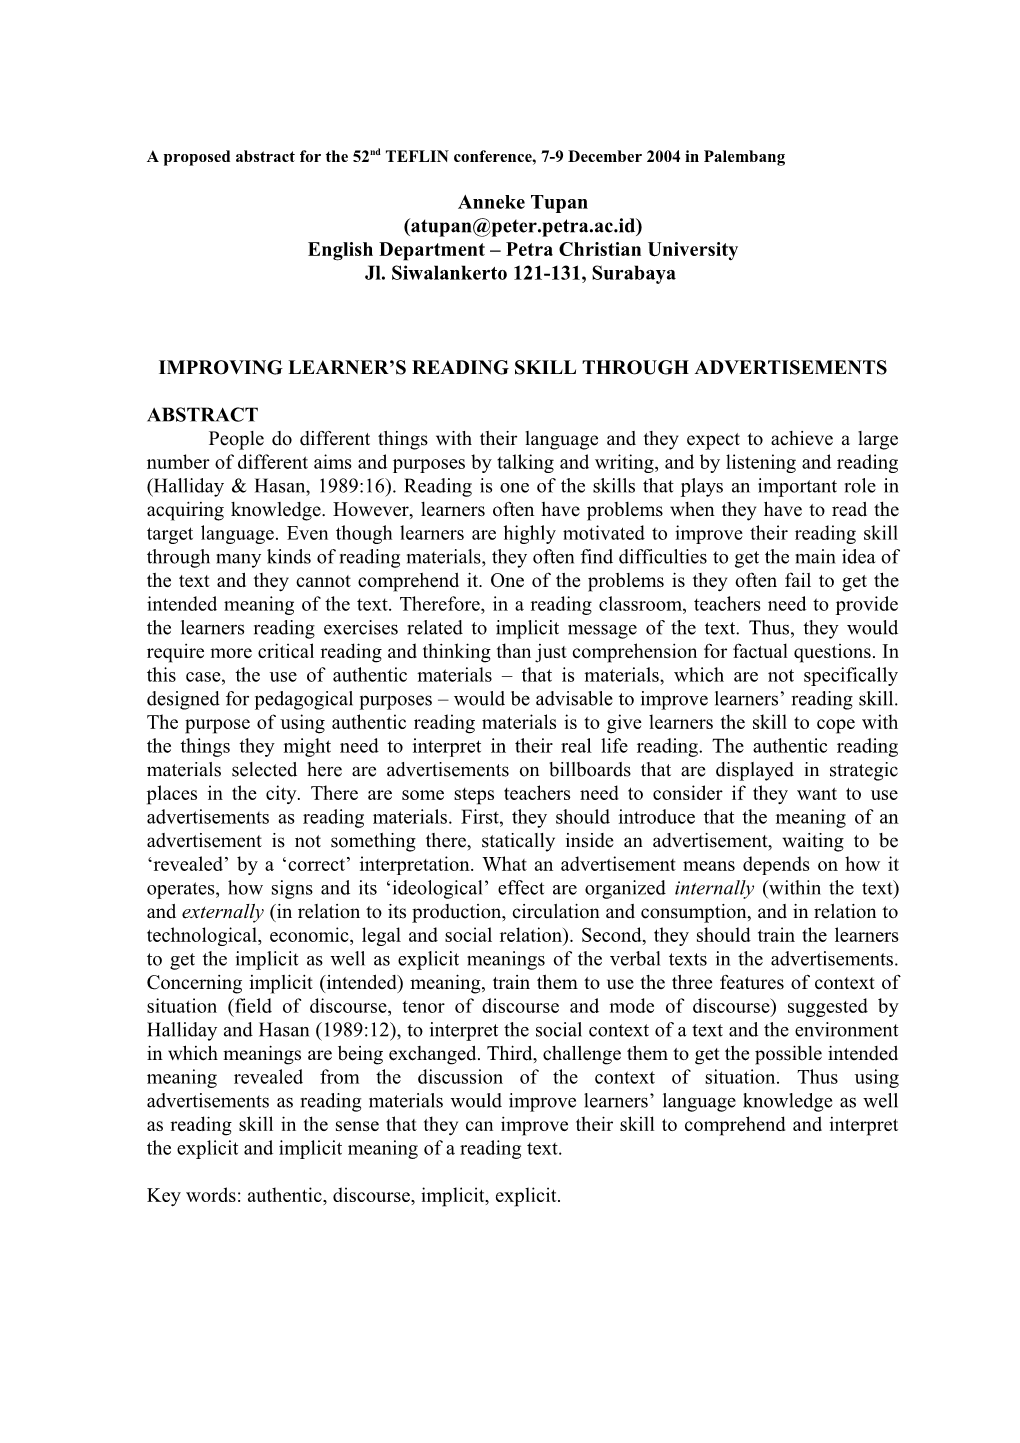 A Proposed Abstract for the 52Nd TEFLIN Conference, 7-9 December 2004 in Palembang